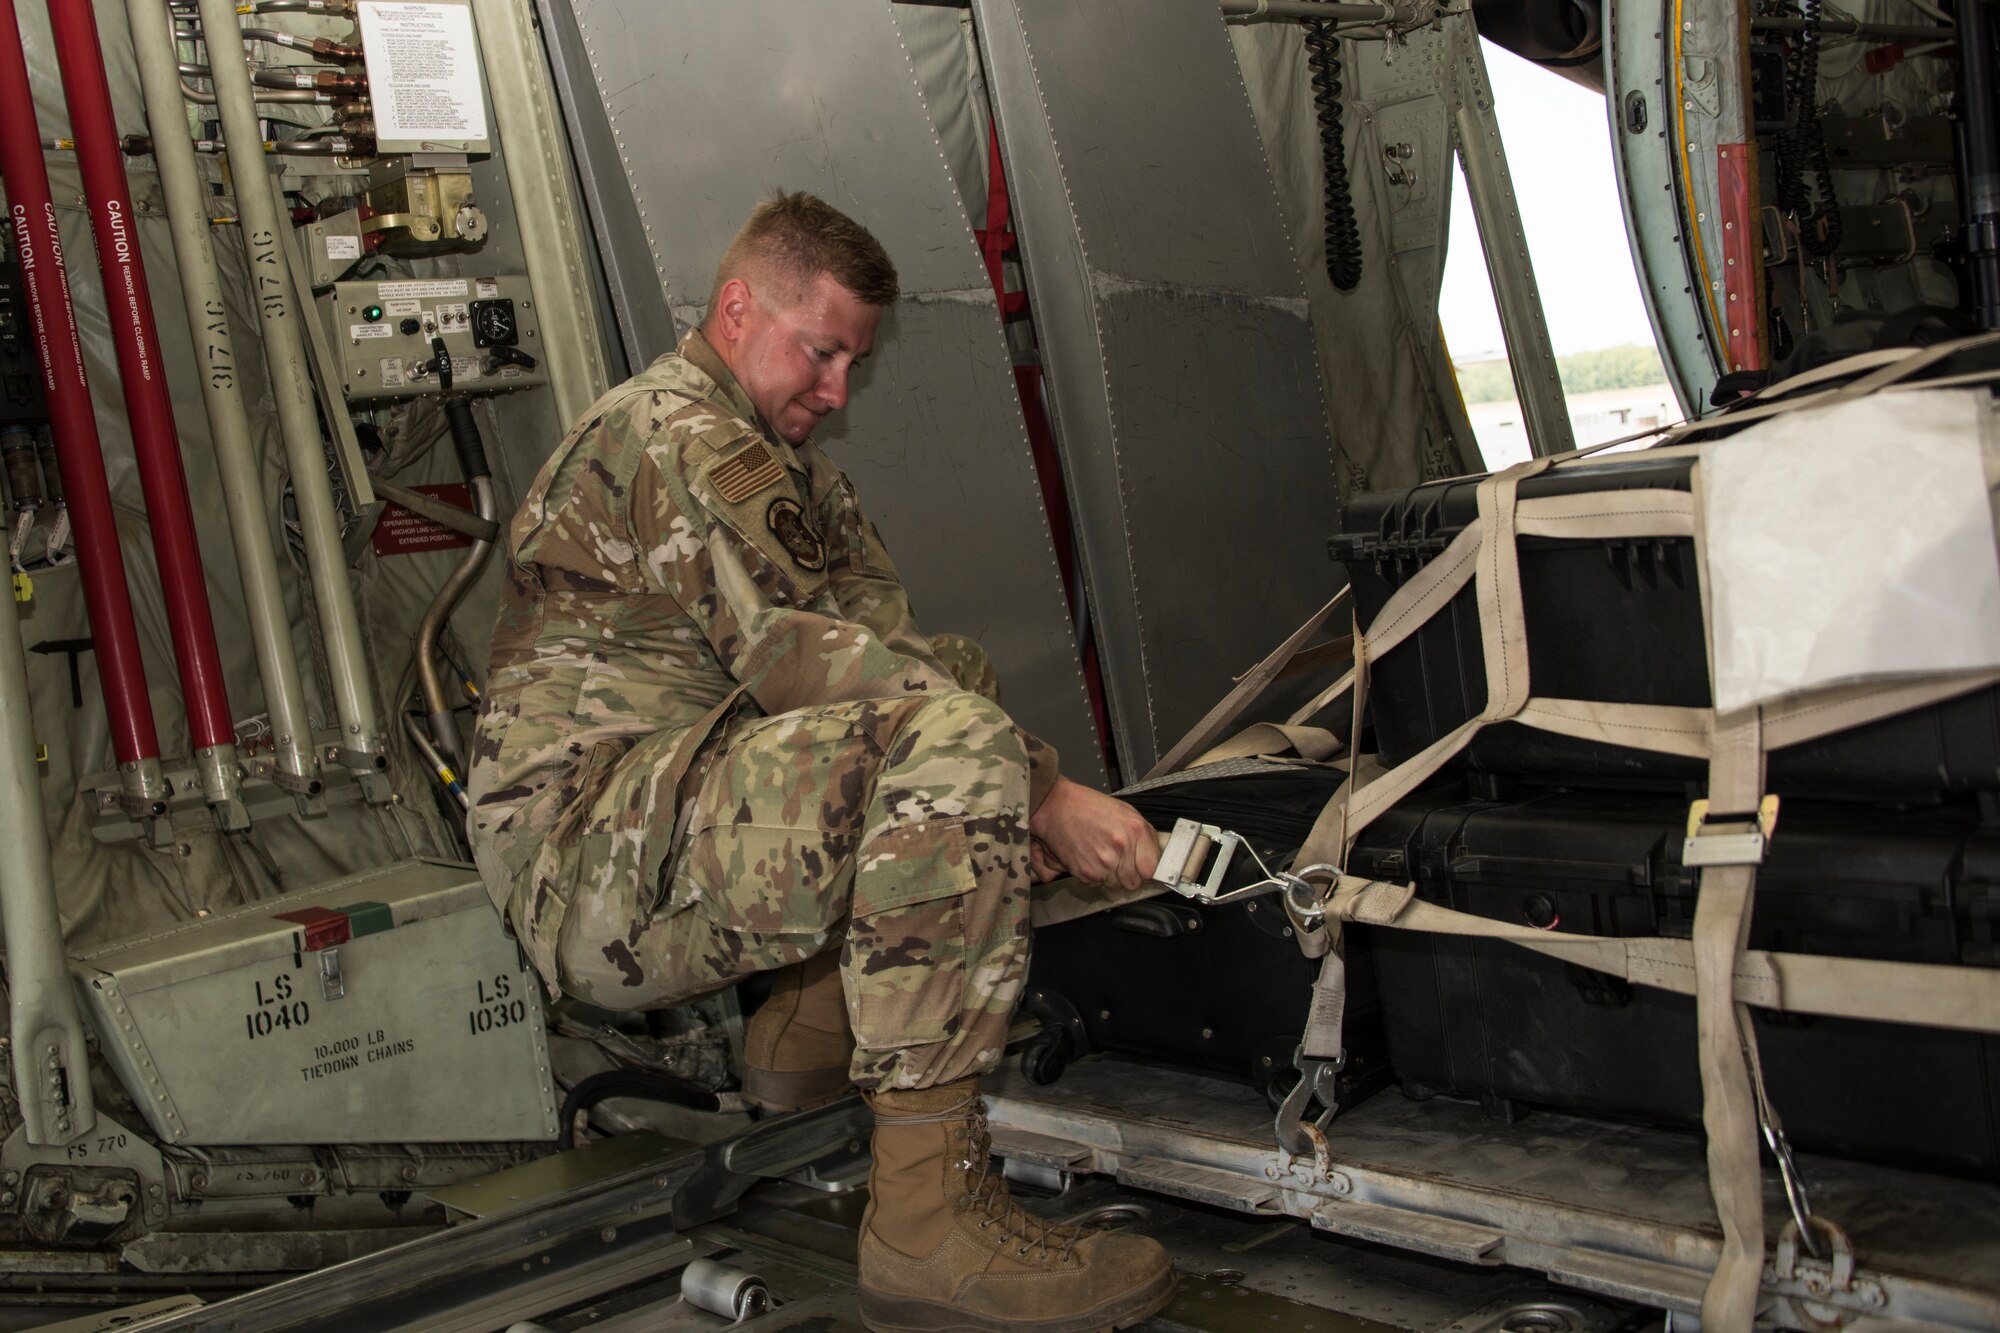 A photo of Airmen strapping down cargo